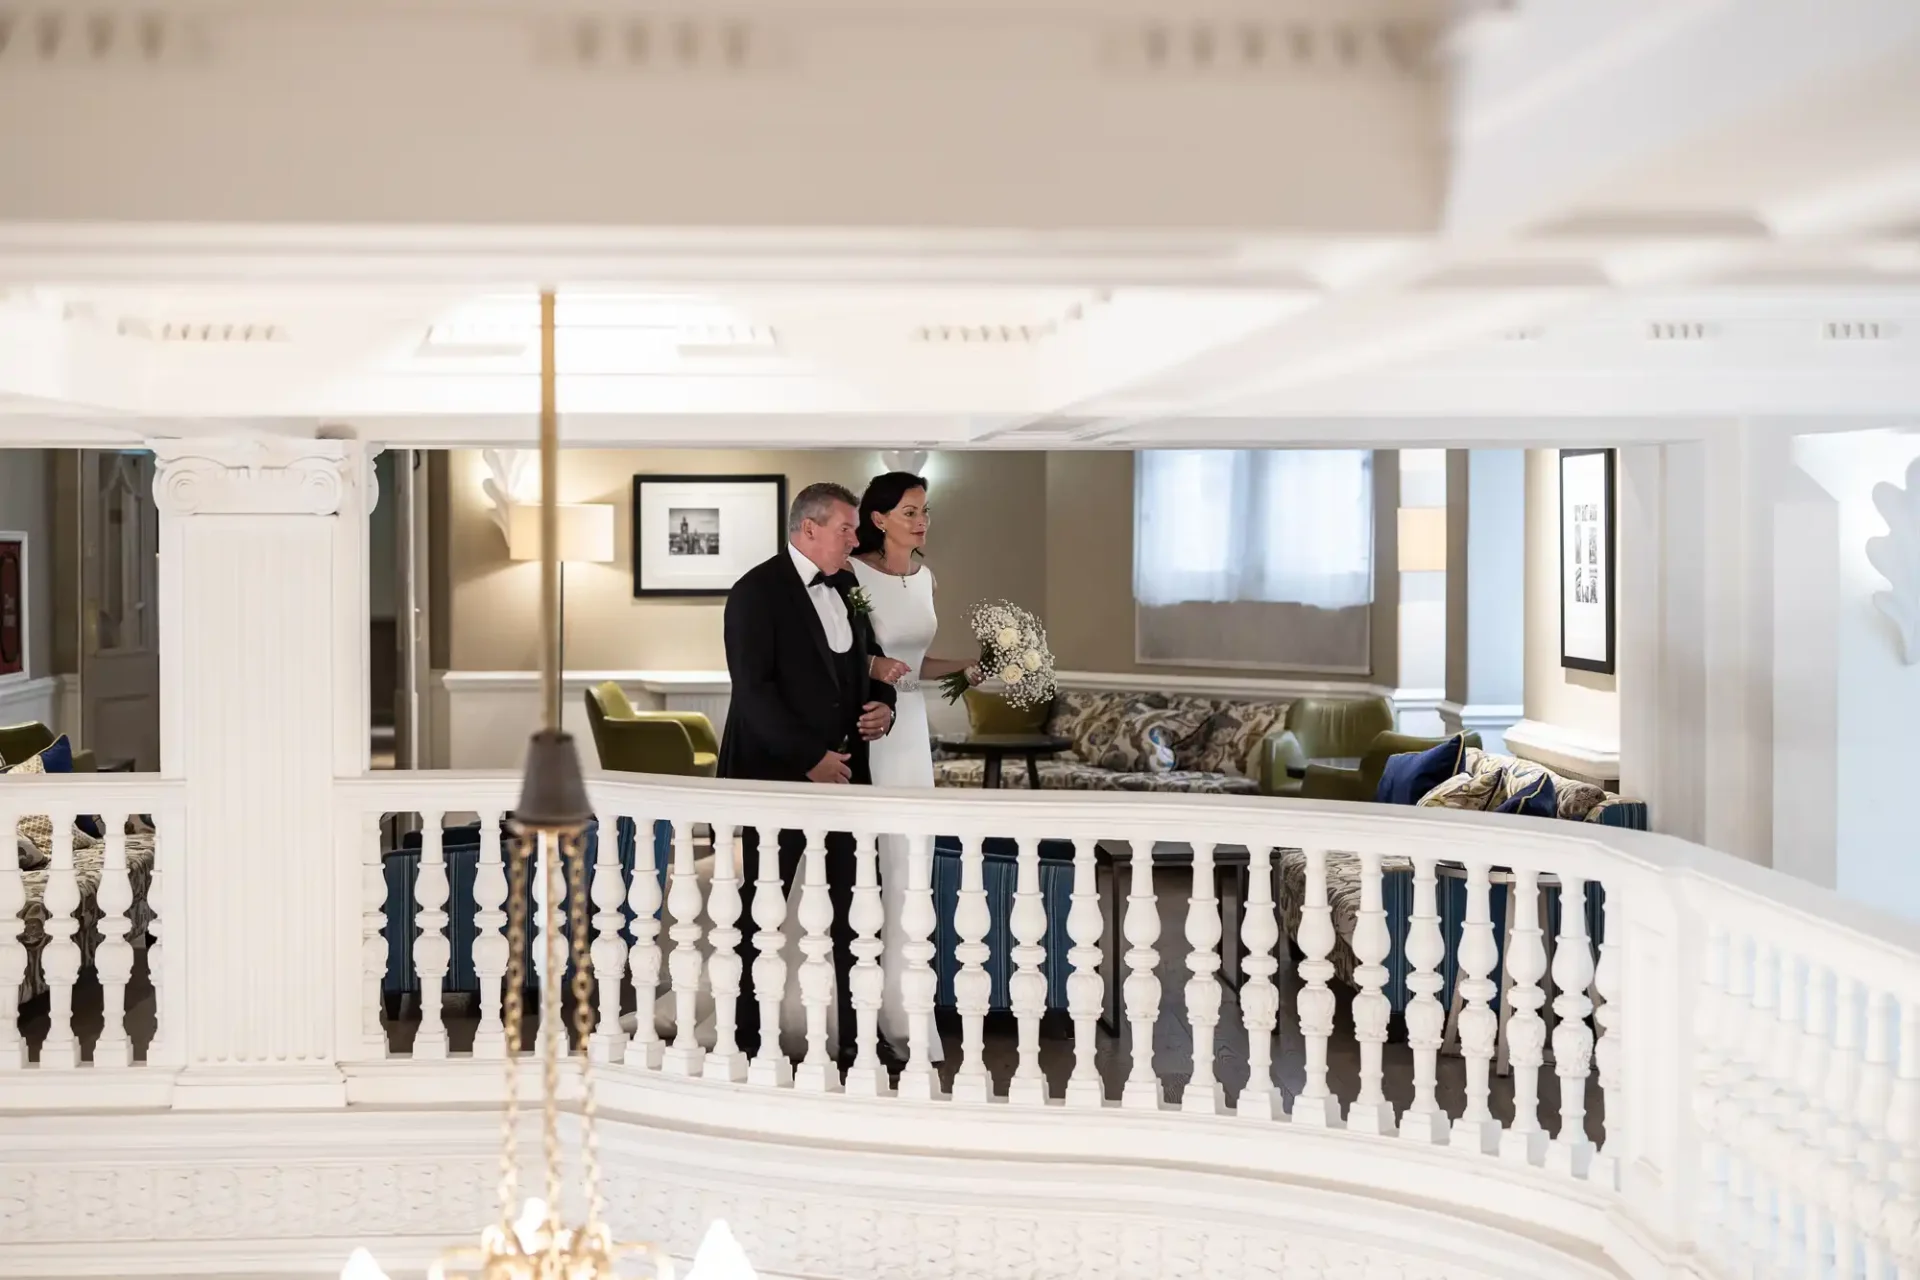 A couple dressed in formal attire stands on an elegant white balcony, overlooking a classy interior setting.